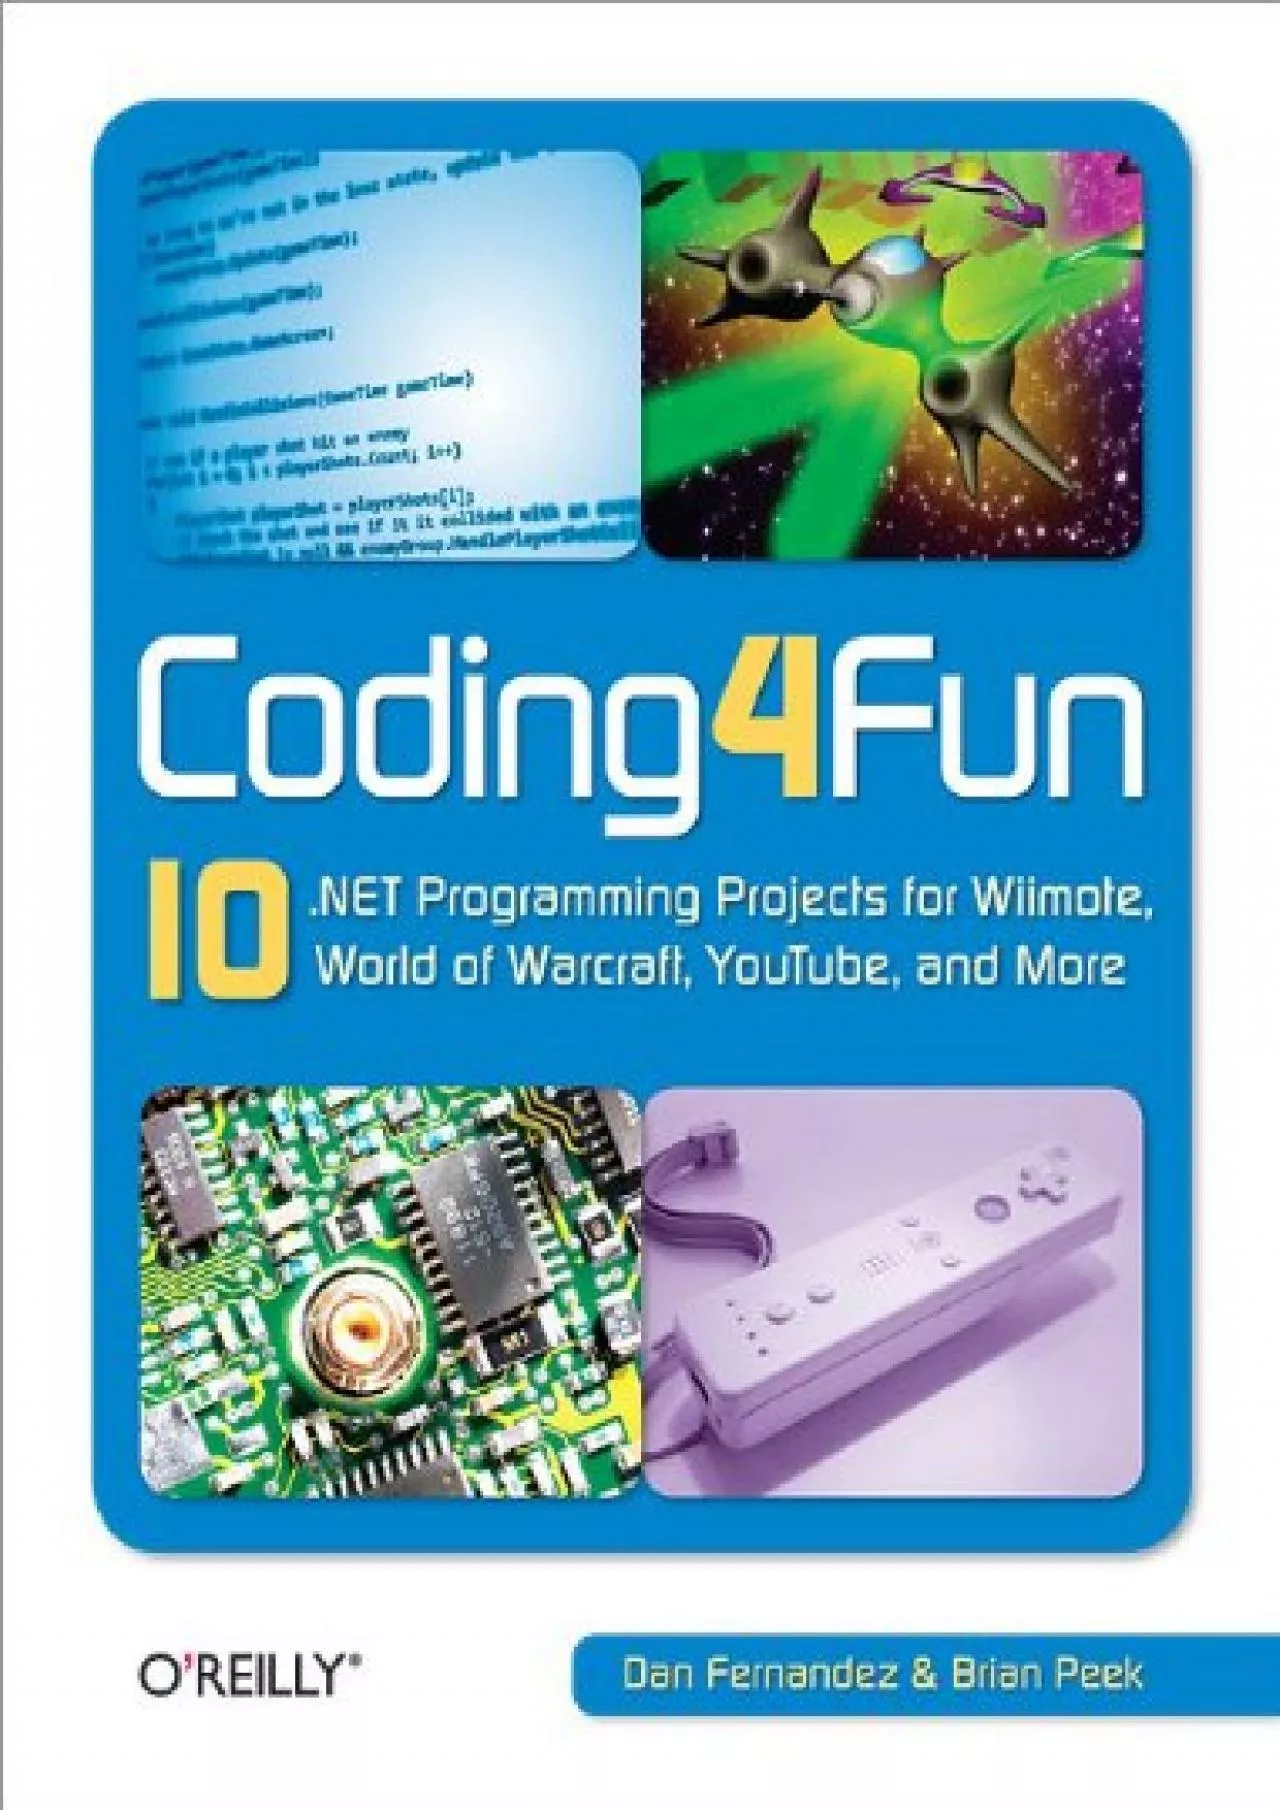 [READING BOOK]-Coding4Fun: 10 .NET Programming Projects for Wiimote, YouTube, World of